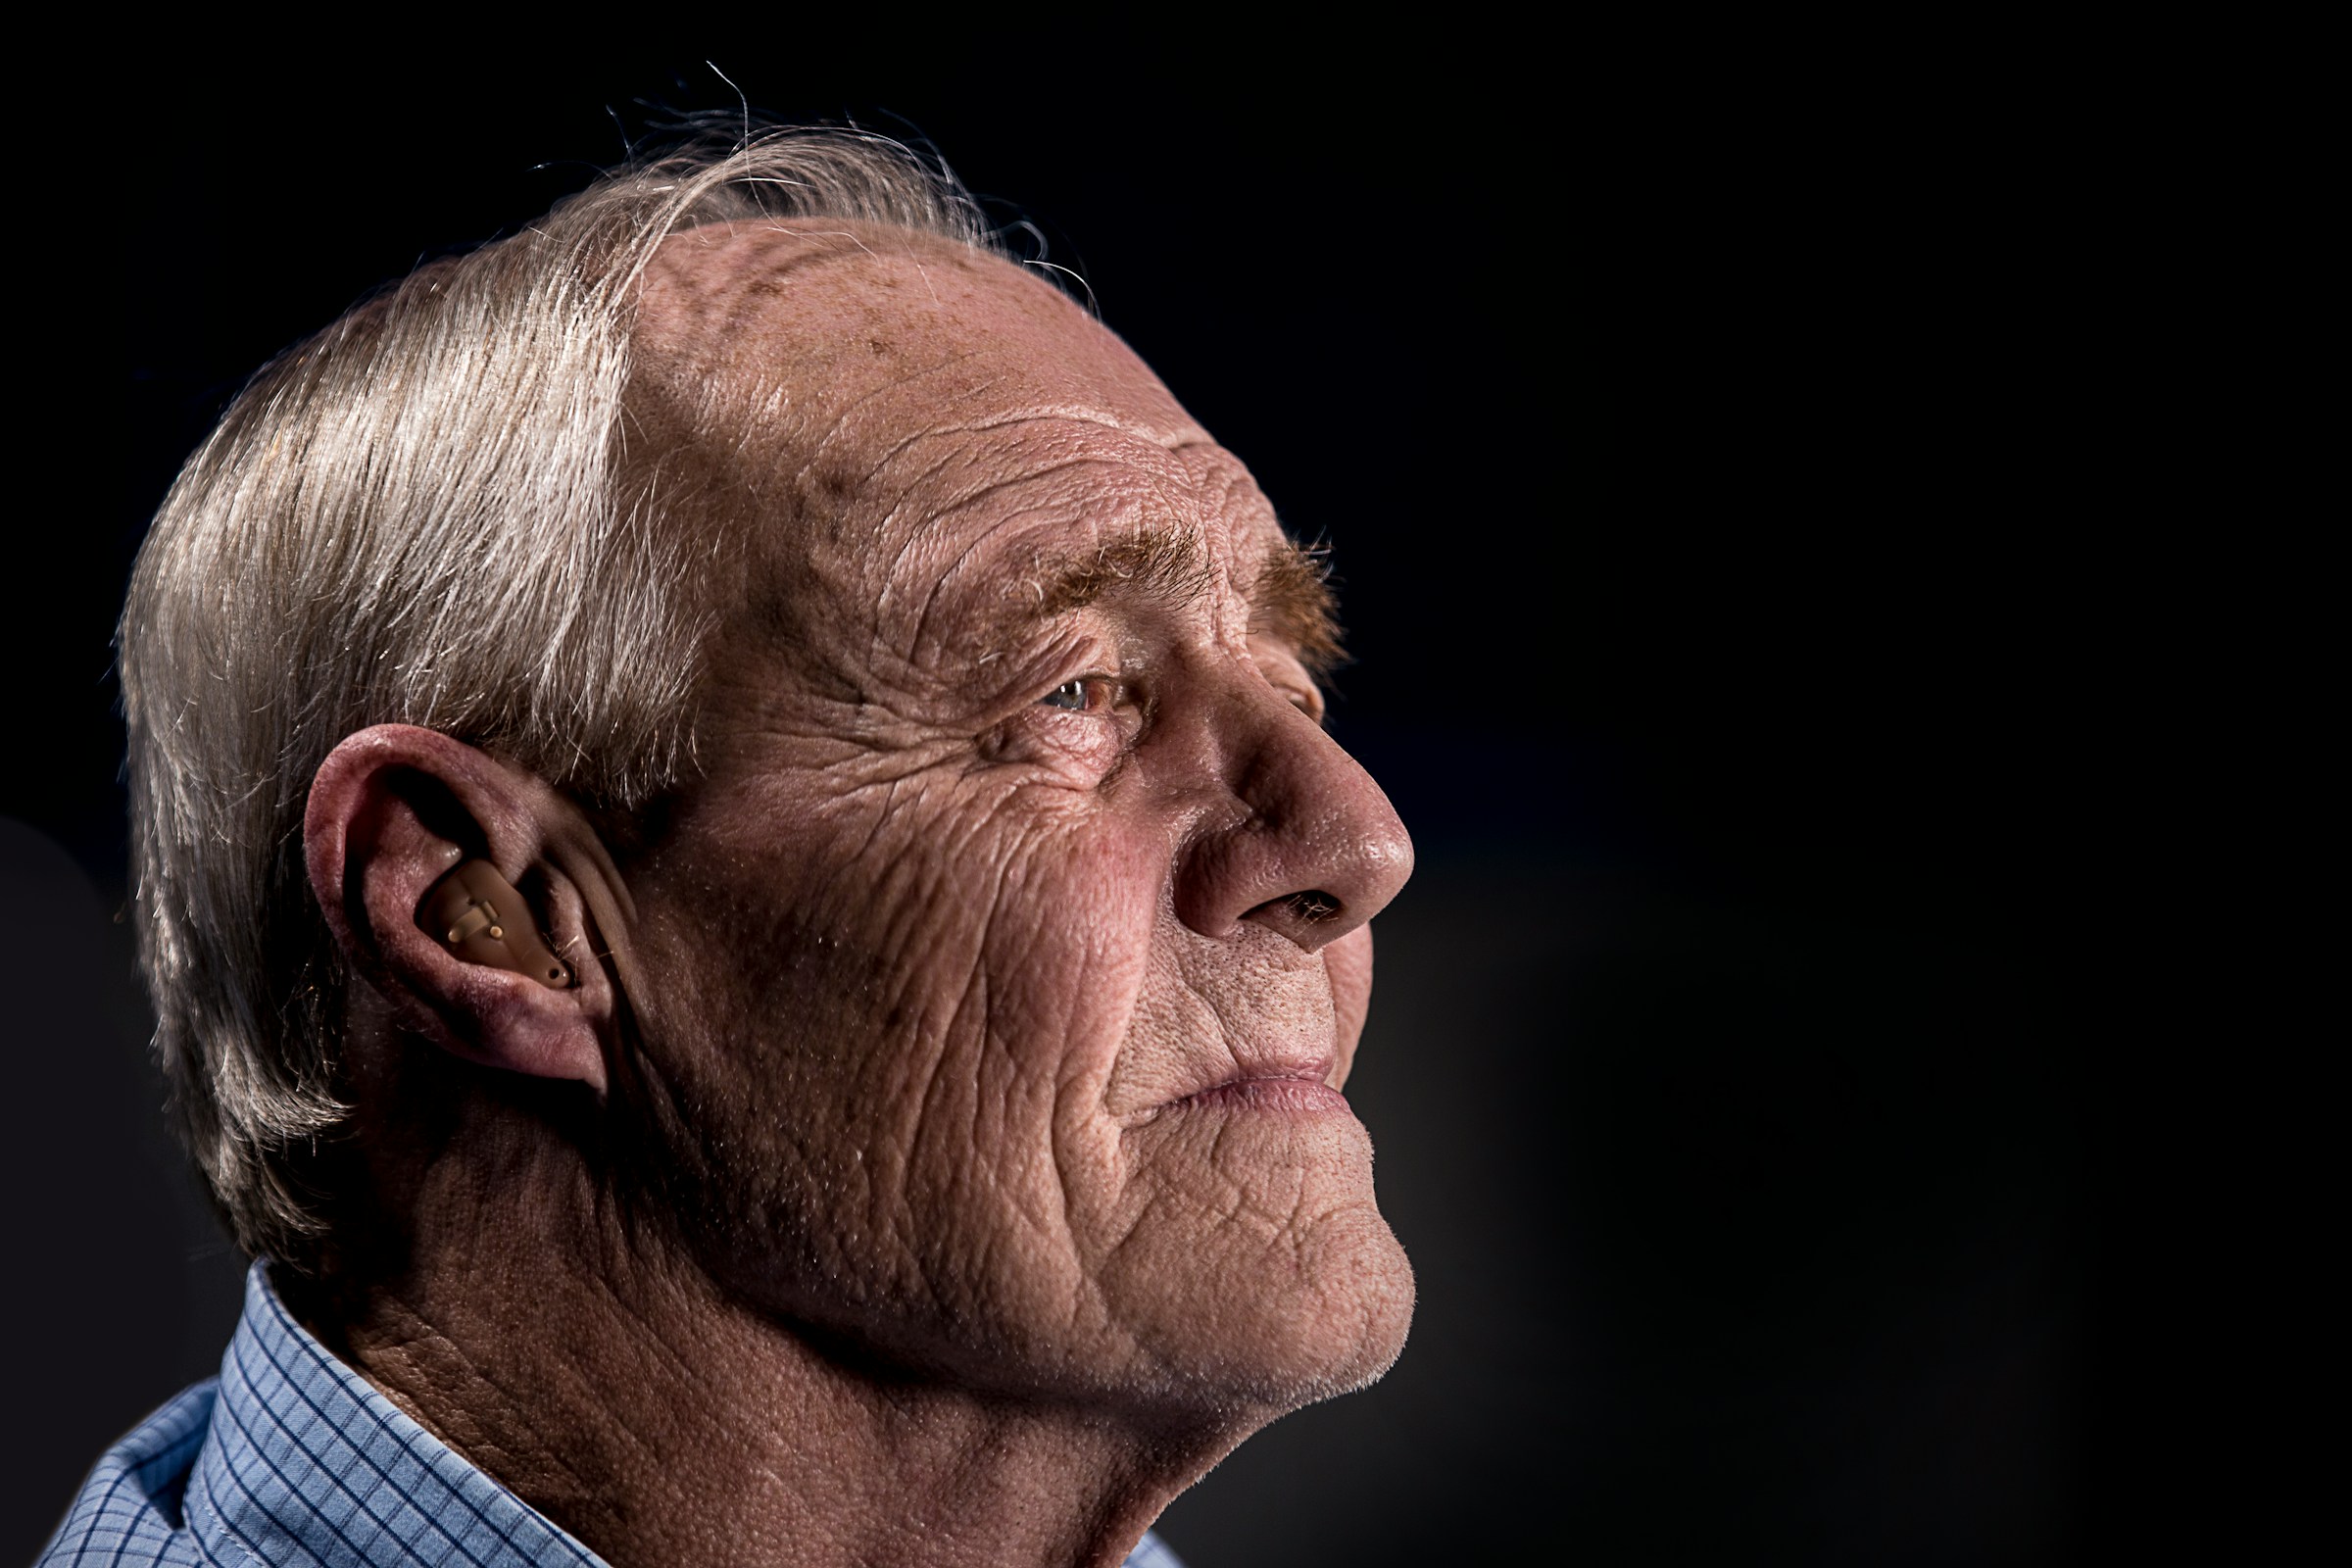 A side profile of an old man | Source: Unsplash